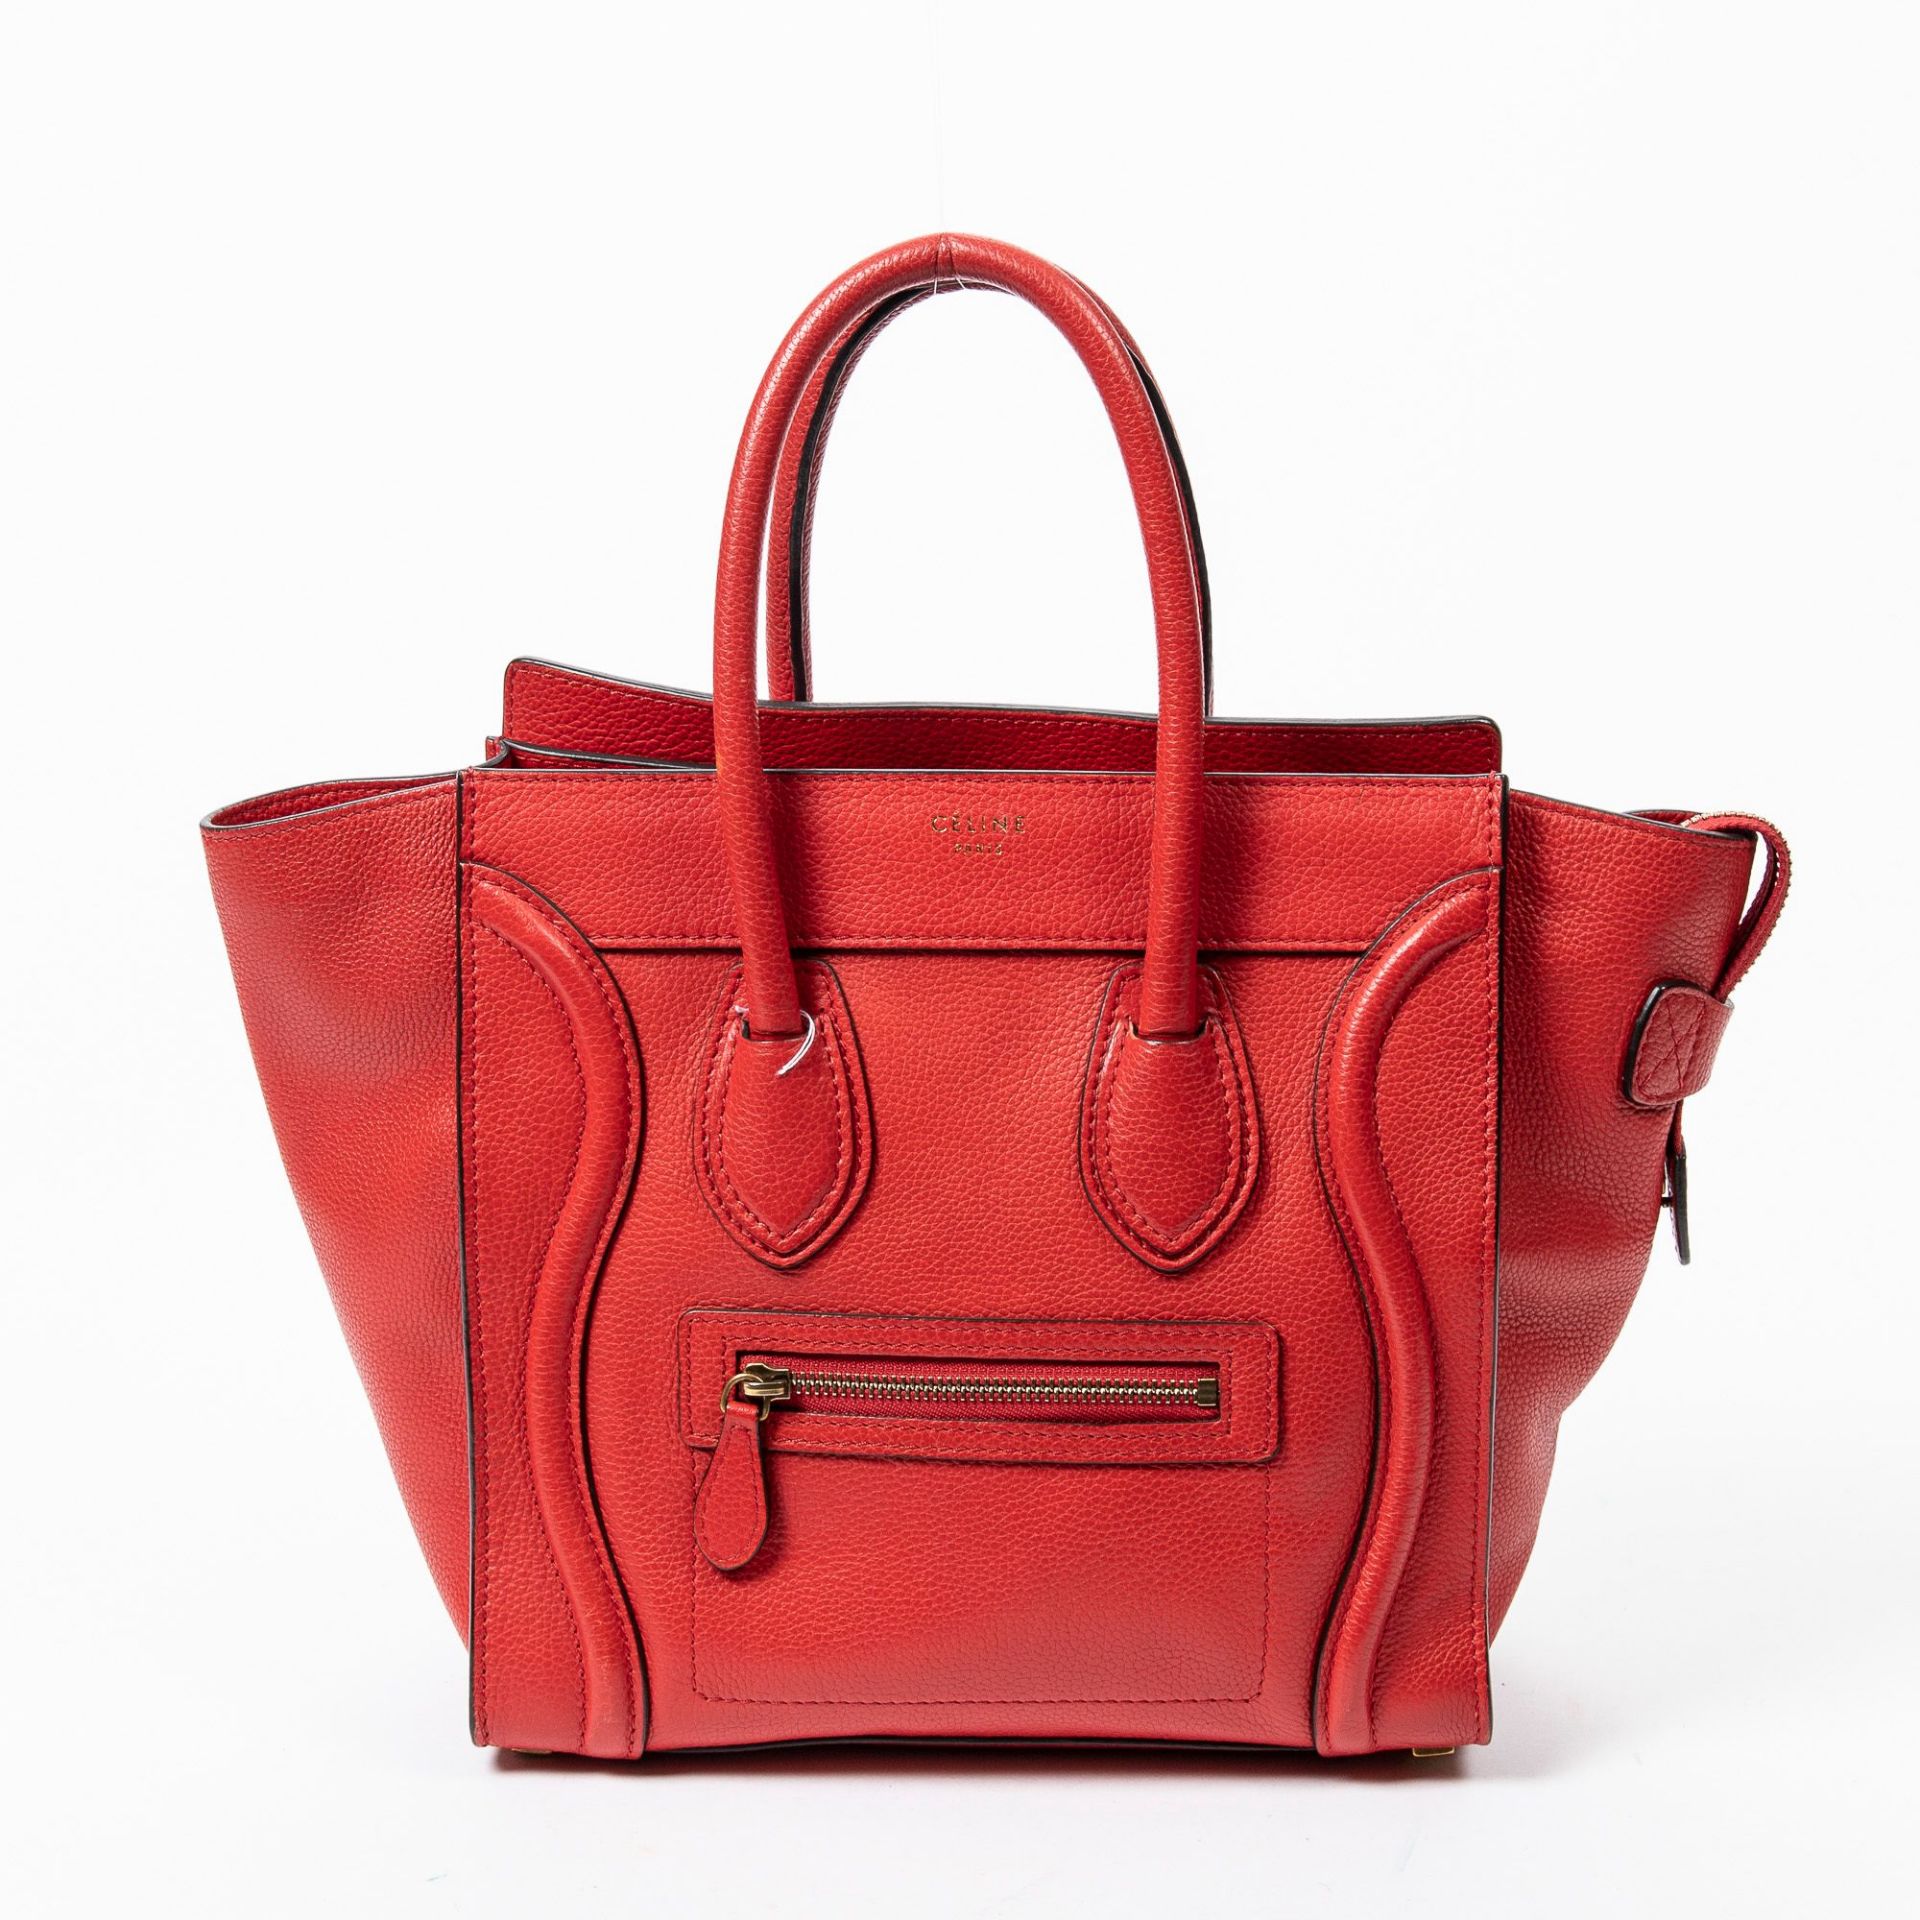 RRP £2615 Celine Luggage in Red Handbag - AAN4832 - Grade A Please Contact Us Directly For